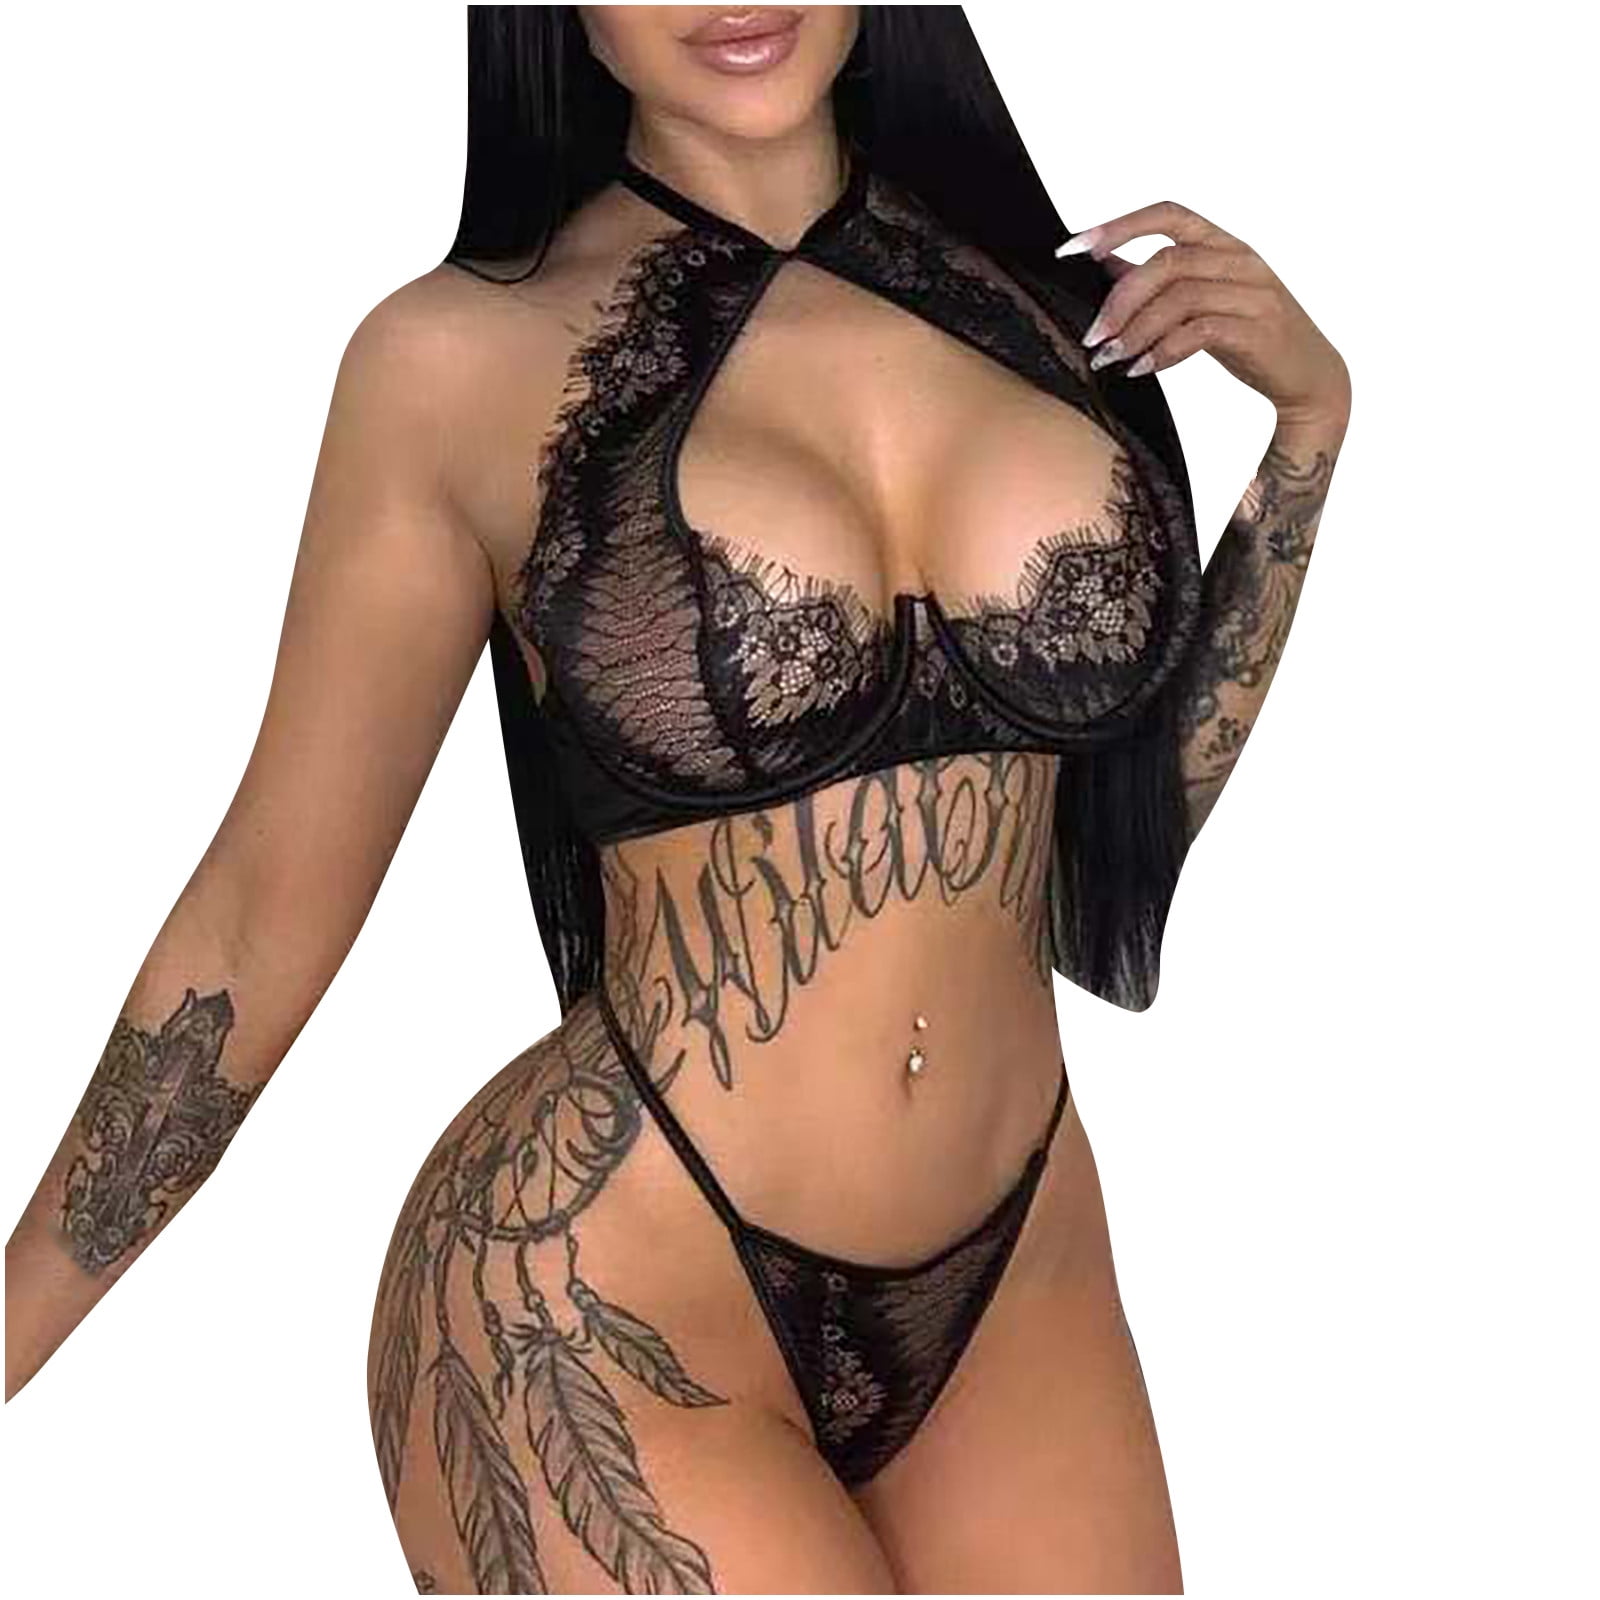 Deals of the Day,Tarmeek Womens Sexy Lingerie 2PCS Lace Sexy Women Temptation Babydoll Lingerie Underpants Underwear Set Teddy Babydoll Bodysuit Sexy Lingerie for Women Naughty for Sex/Play